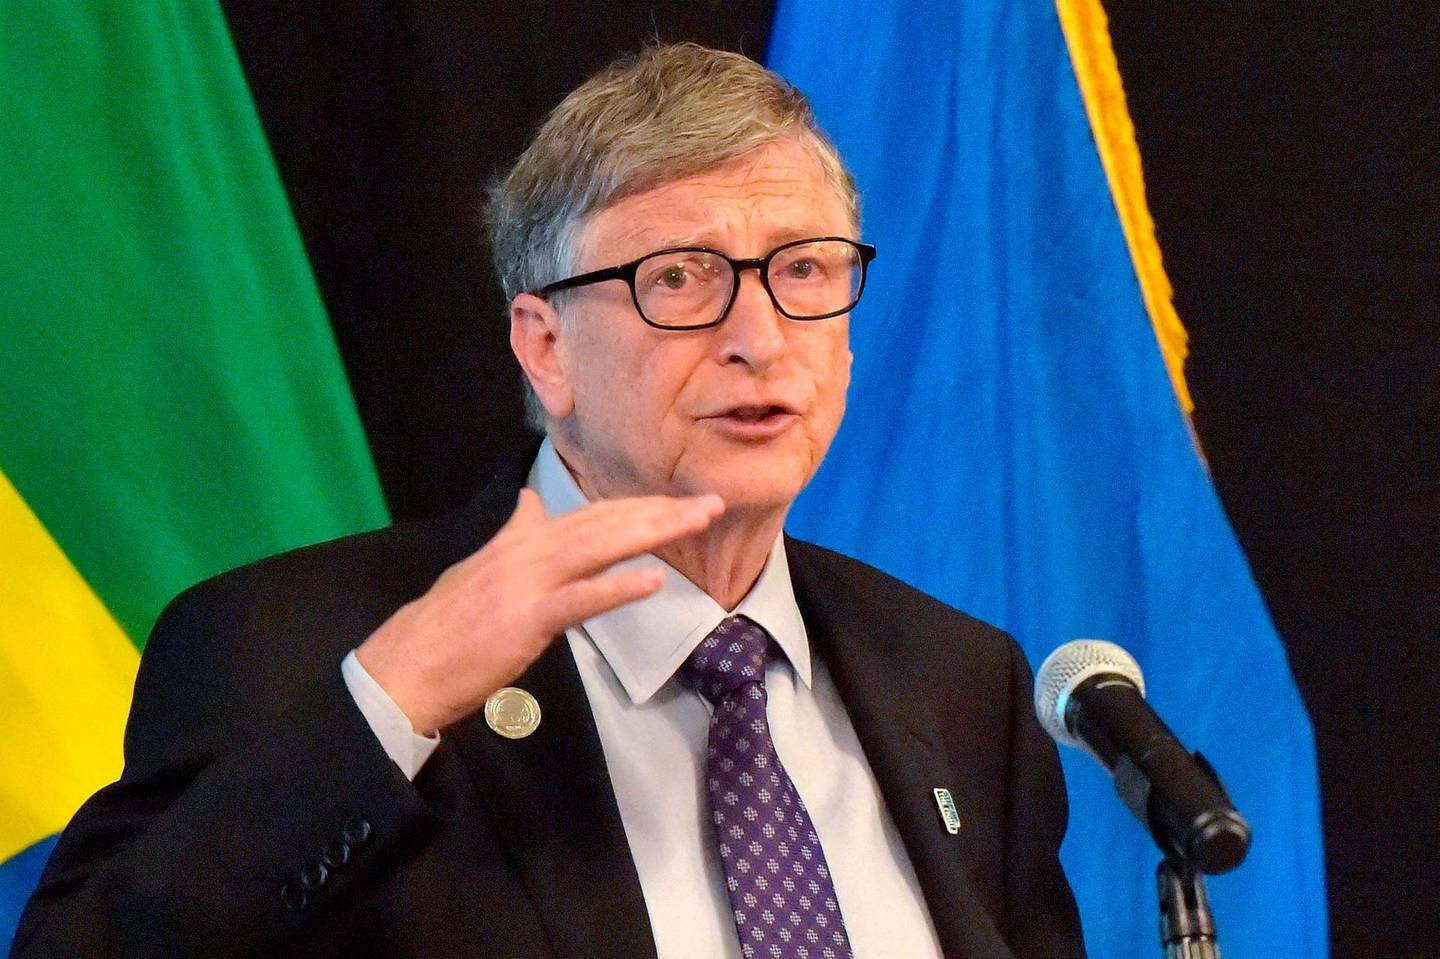 (FILES) In this file photo taken on February 9, 2019 US philanthropist and Microsoft founder Bill gates gestures as he speaks during the "Africa leadership meeting, investing in health", ahead of an African Union summit in Ethiopia's capital Addis Ababa. Jeff Bezos remains the world's richest person, ahead of Bill Gates and Warren Buffett, according to the latest Forbes list of the ultra wealthy. But while things are largely stable up top in that ranking, Facebook founder Mark Zuckerberg dropped three spots and former New York mayor Michael Bloomberg rose by two. According to the list announced March 4, 2019 by Forbes, the riches of Bezos, 55, have swelled by $19 billion in one year and he is now worth $131 billion. / AFP / SIMON MAINA
